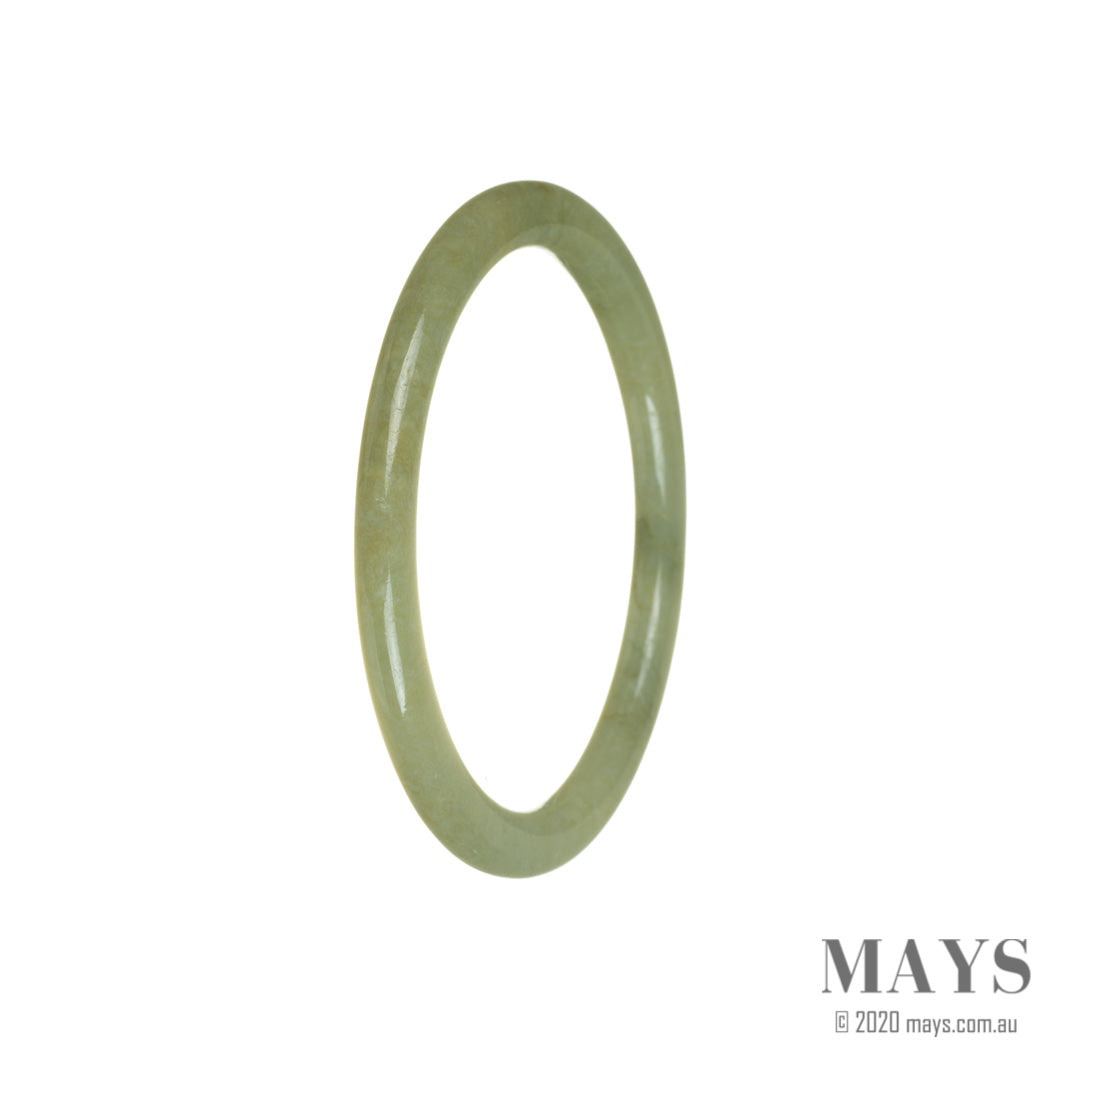 A close-up photograph of a thin, 58mm jade bangle in a yellowish green color. The bangle is made of traditional jade and is certified as untreated. It is sold by MAYS GEMS.